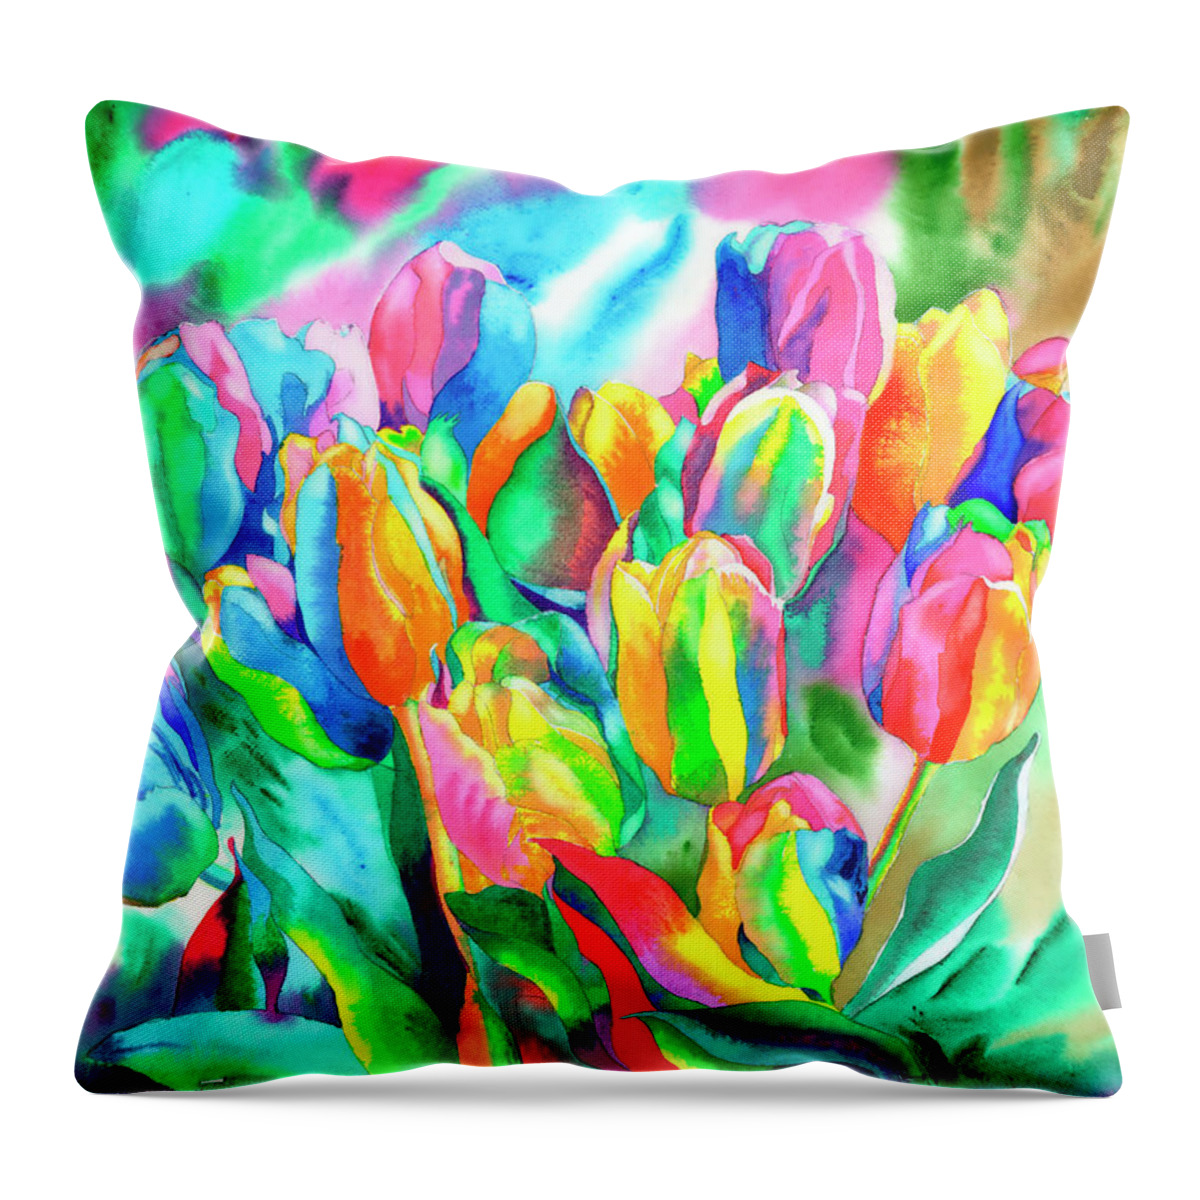 Tulips Throw Pillow featuring the painting Unbridled Tulips by Xavier Francois Hussenet